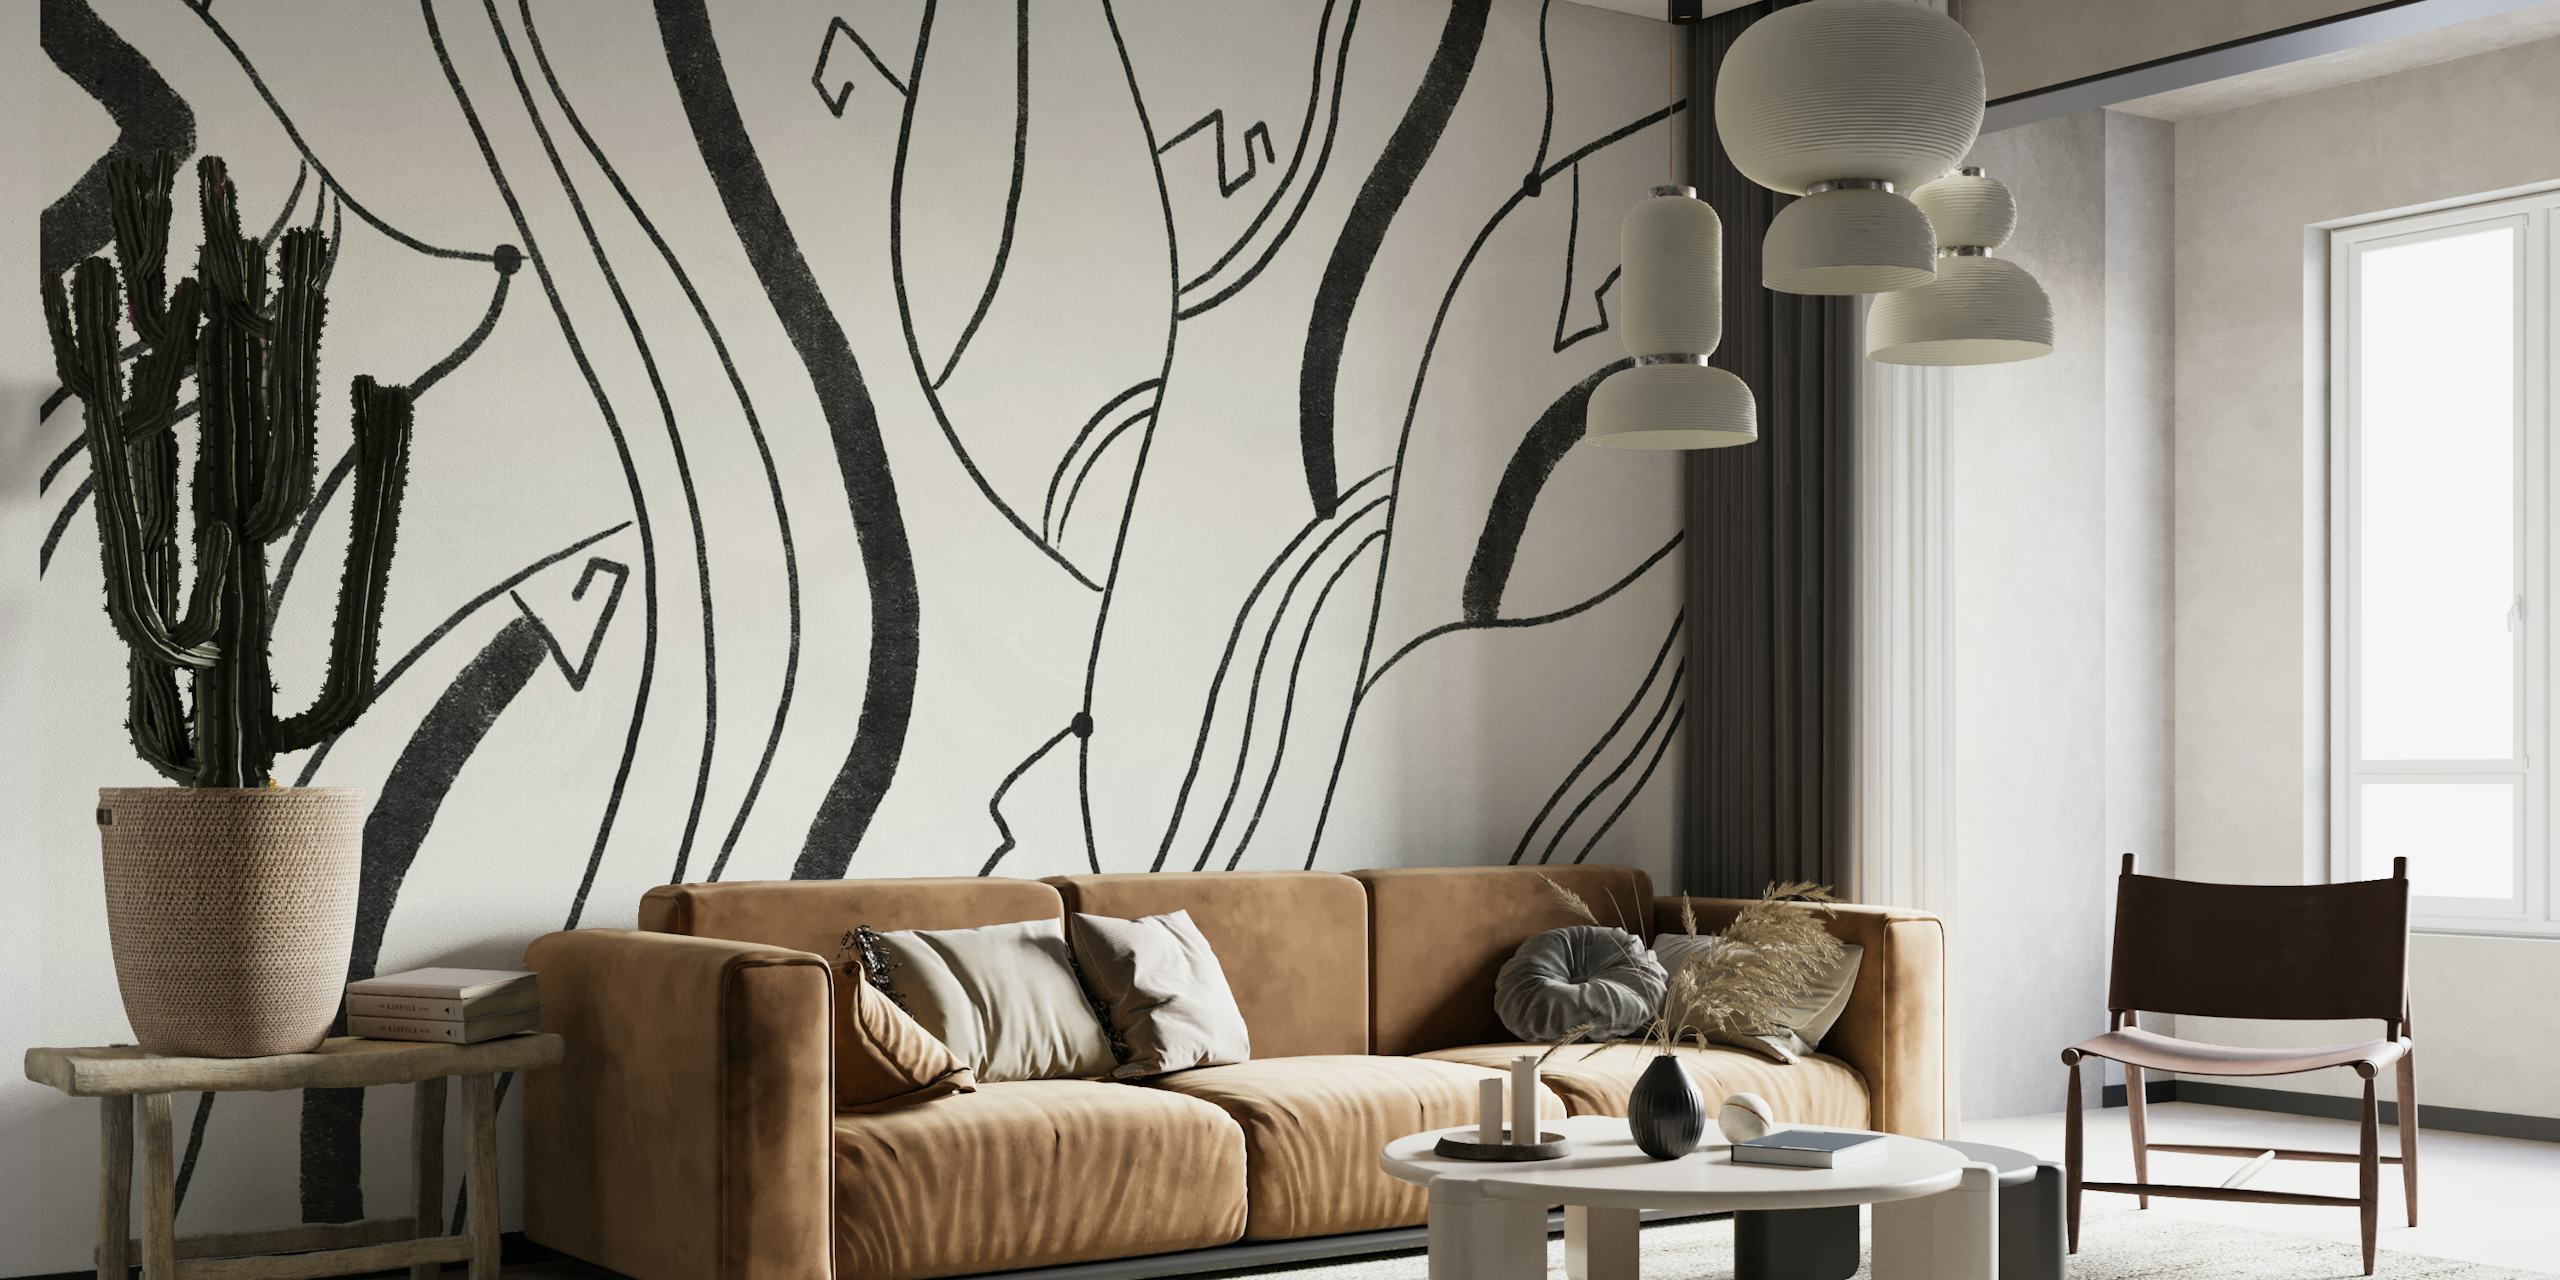 Monochrome abstract line art wall mural from happywall.com